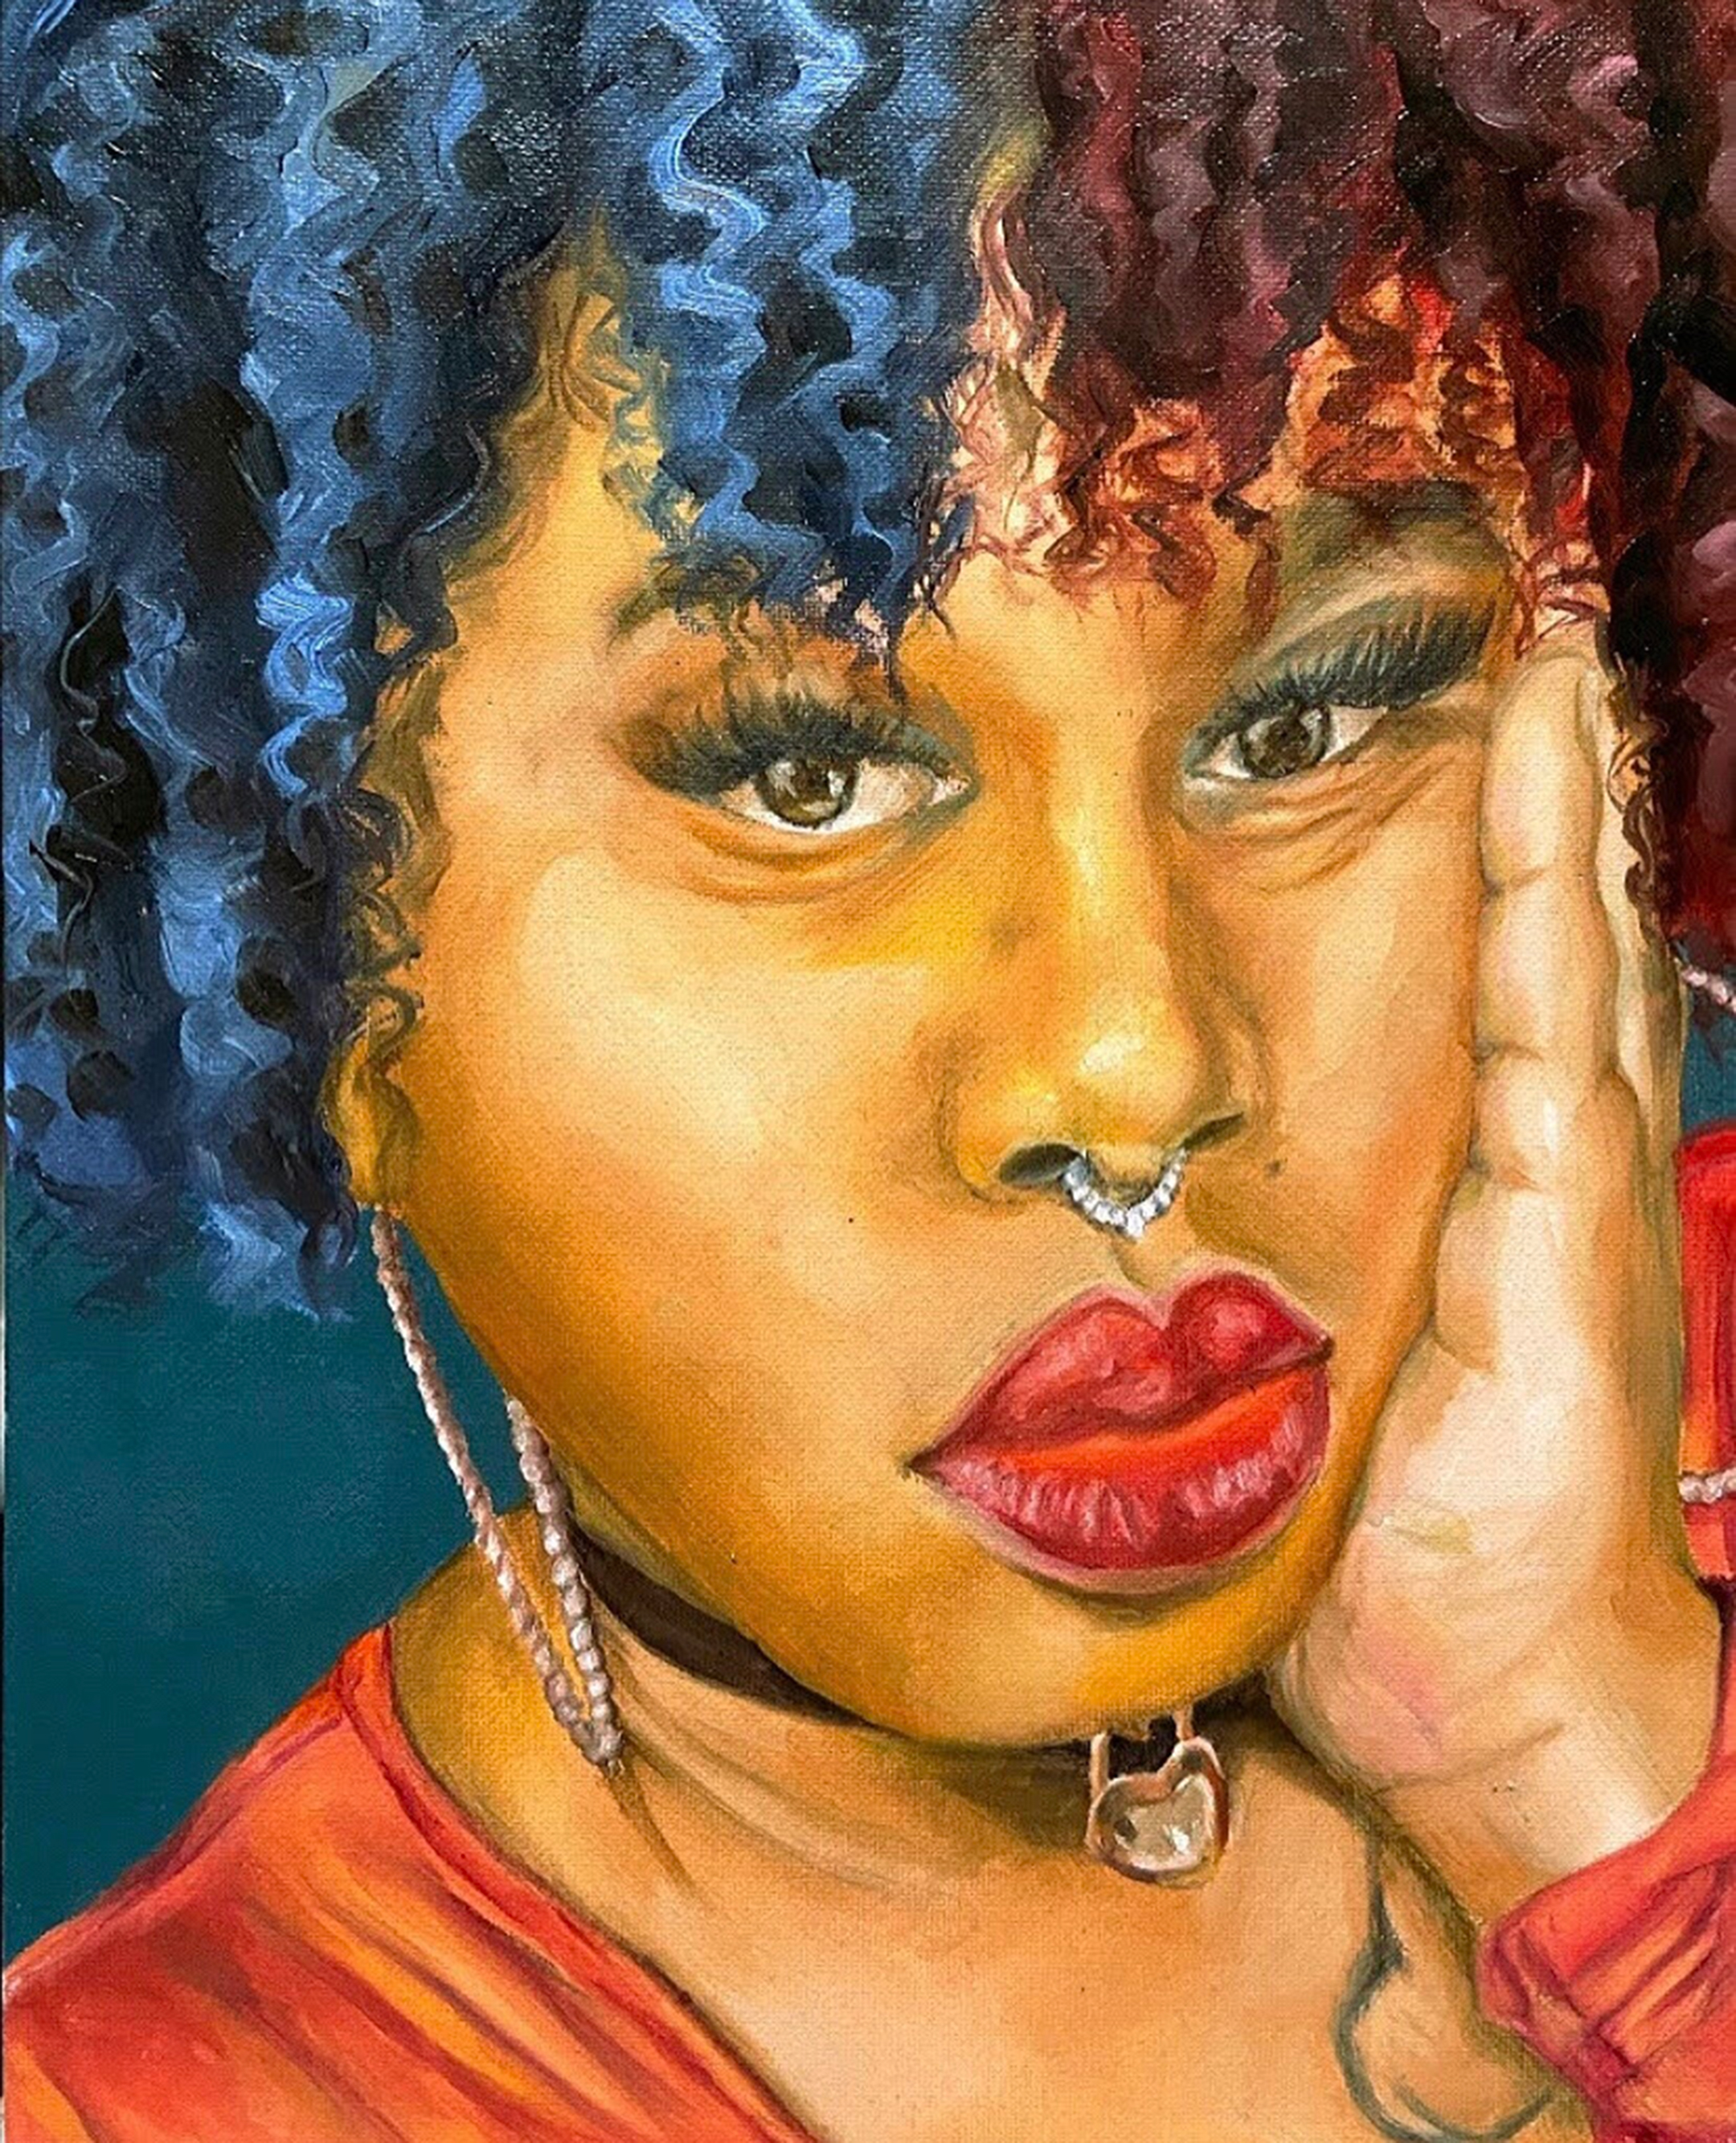 Portrait of a young black woman with blue and red hair, a nose ring, and a red shirt